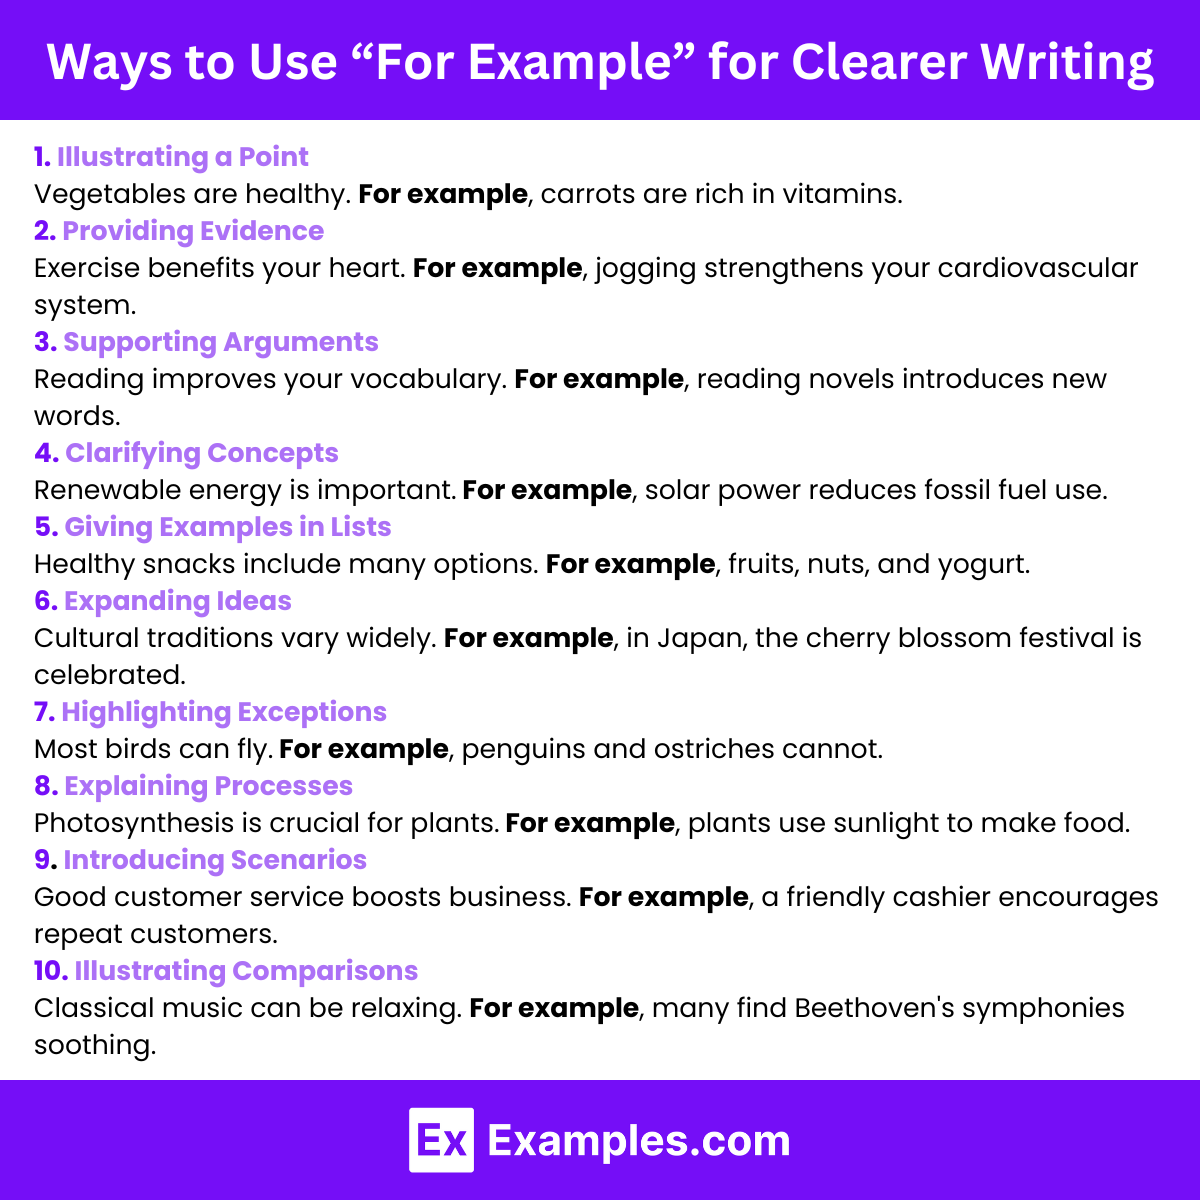 Ways to Use “For Example” for Clearer Writing